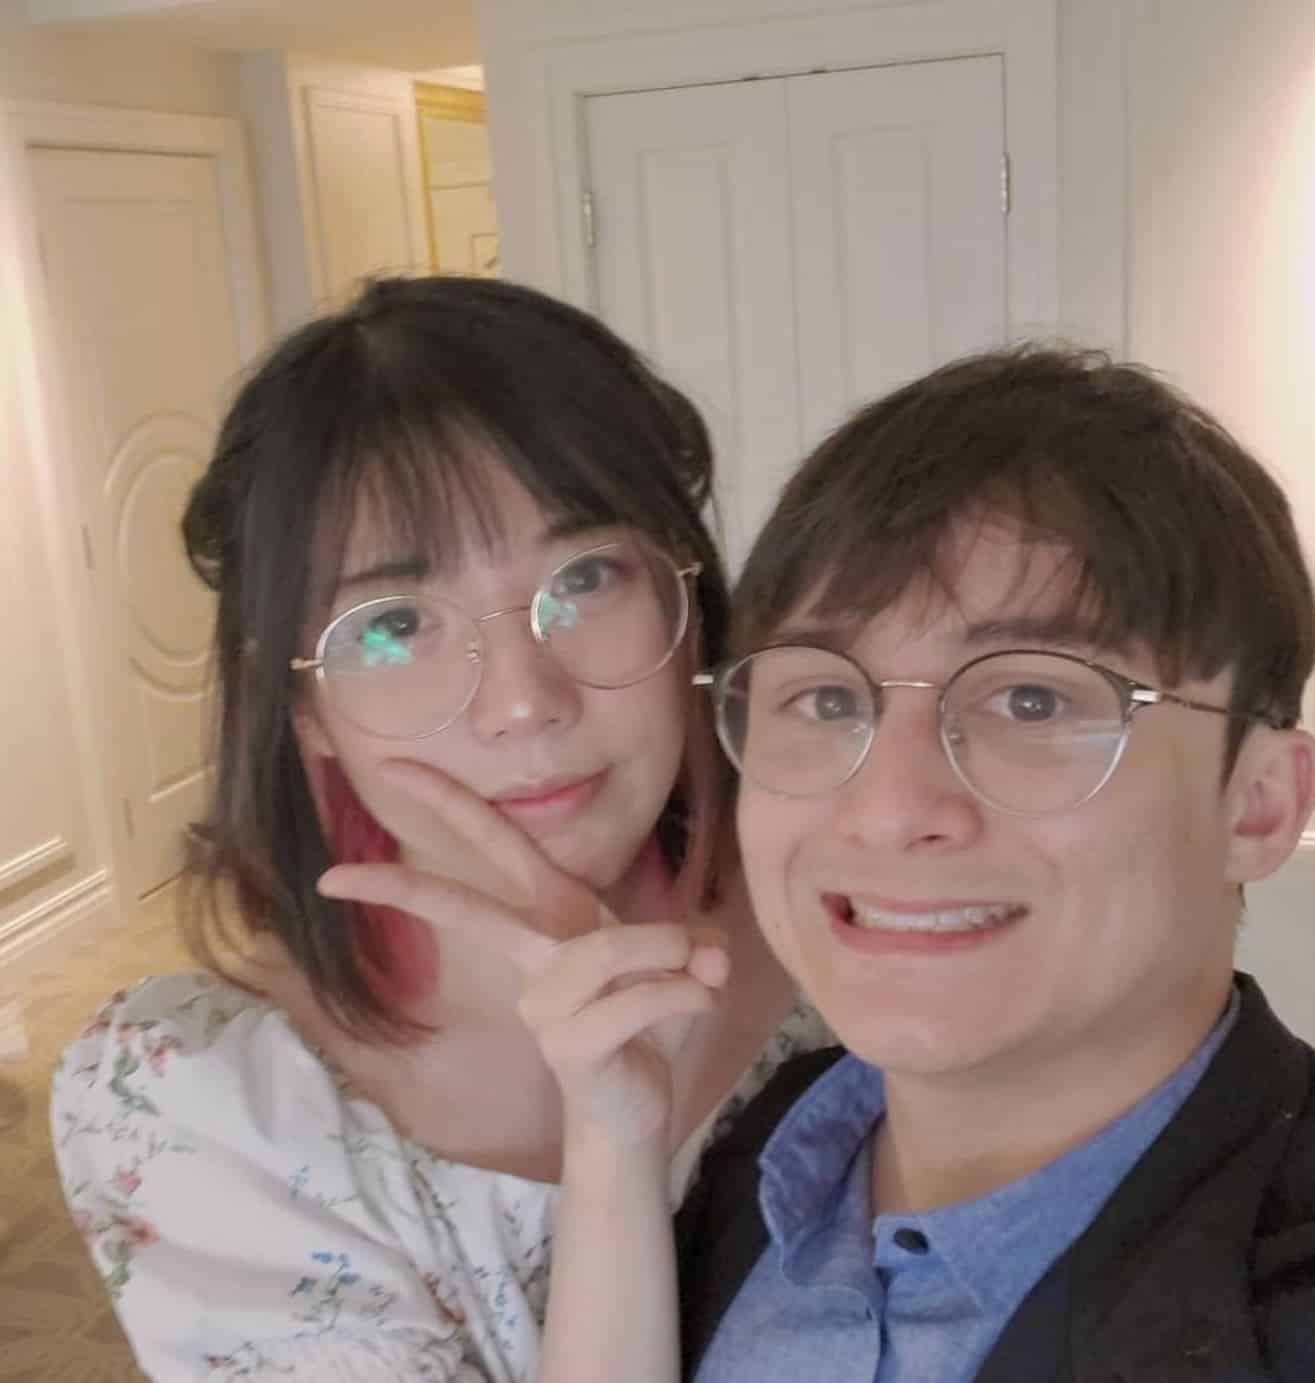 LilyPichu and Michael Reeves